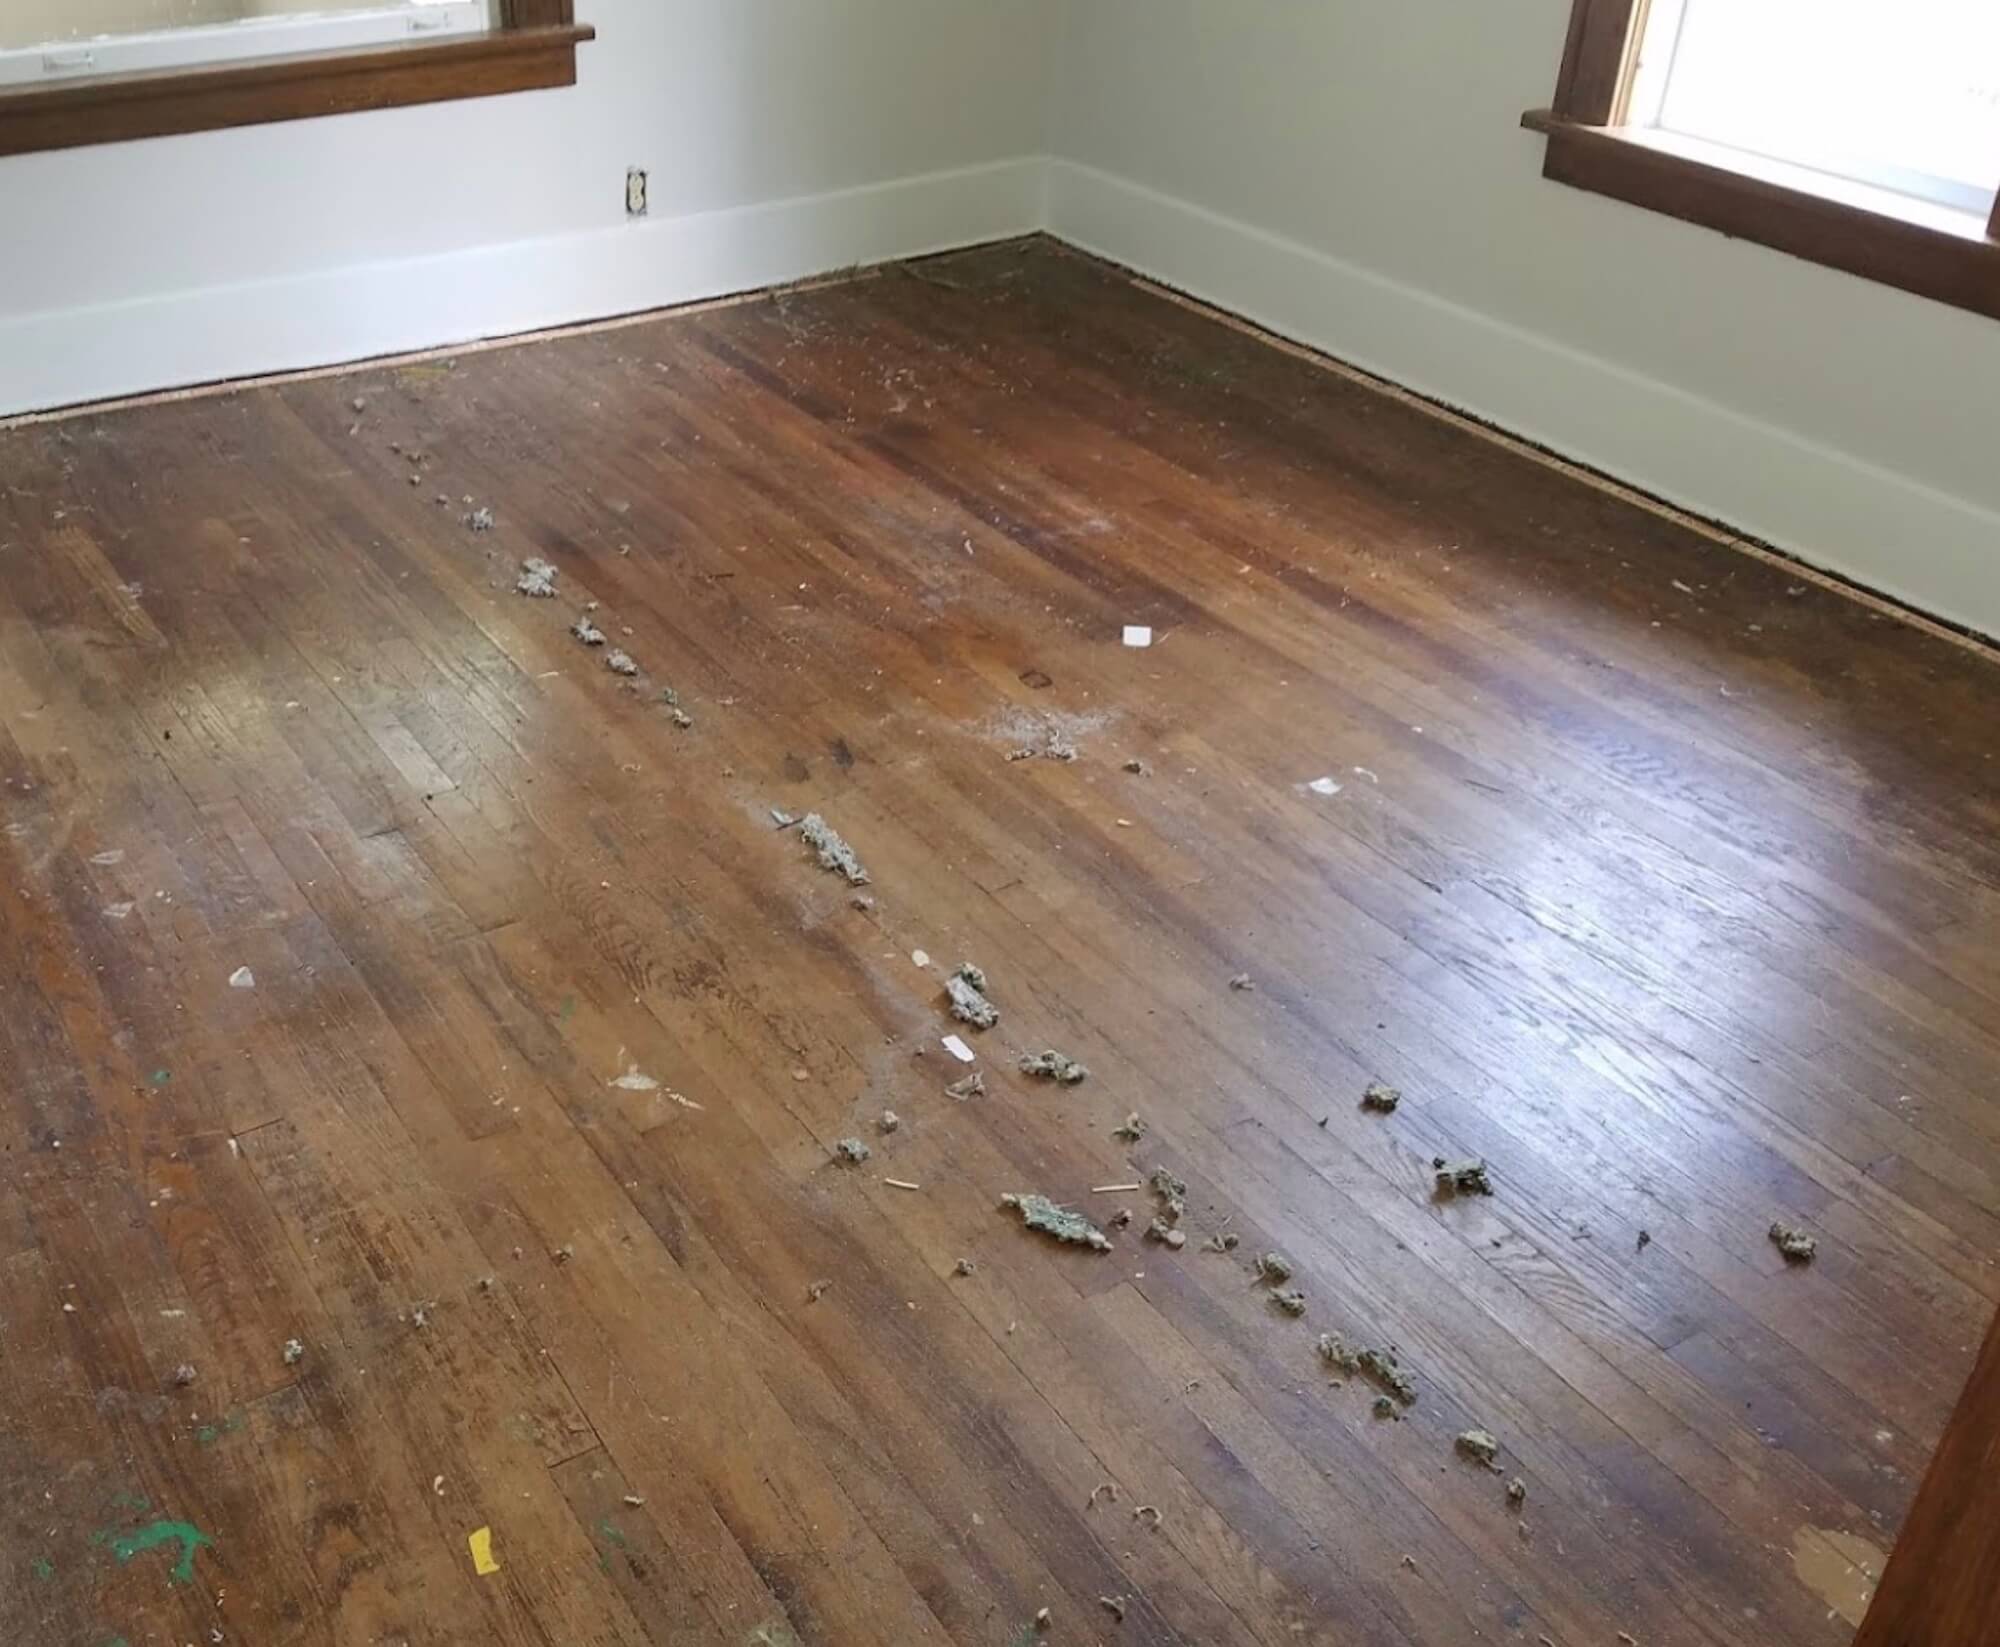 a floor in need of refinishing